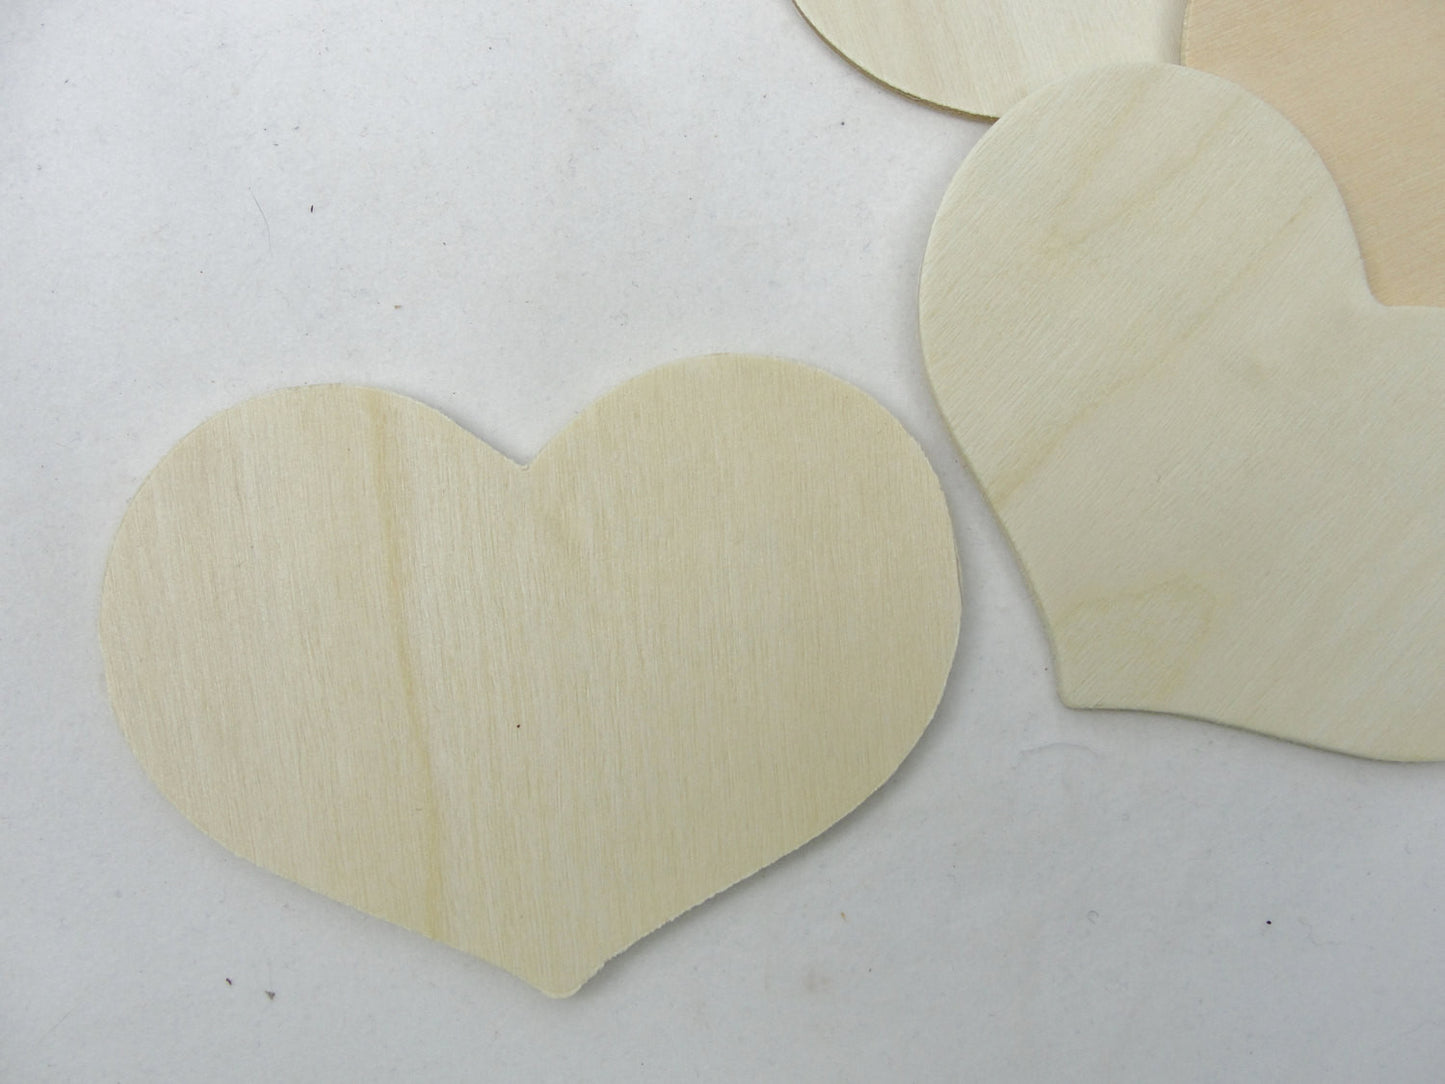 5 wooden country hearts 3 3/8" wide 2 1/2" tall 1/8" thick unfinished - Wood parts - Craft Supply House